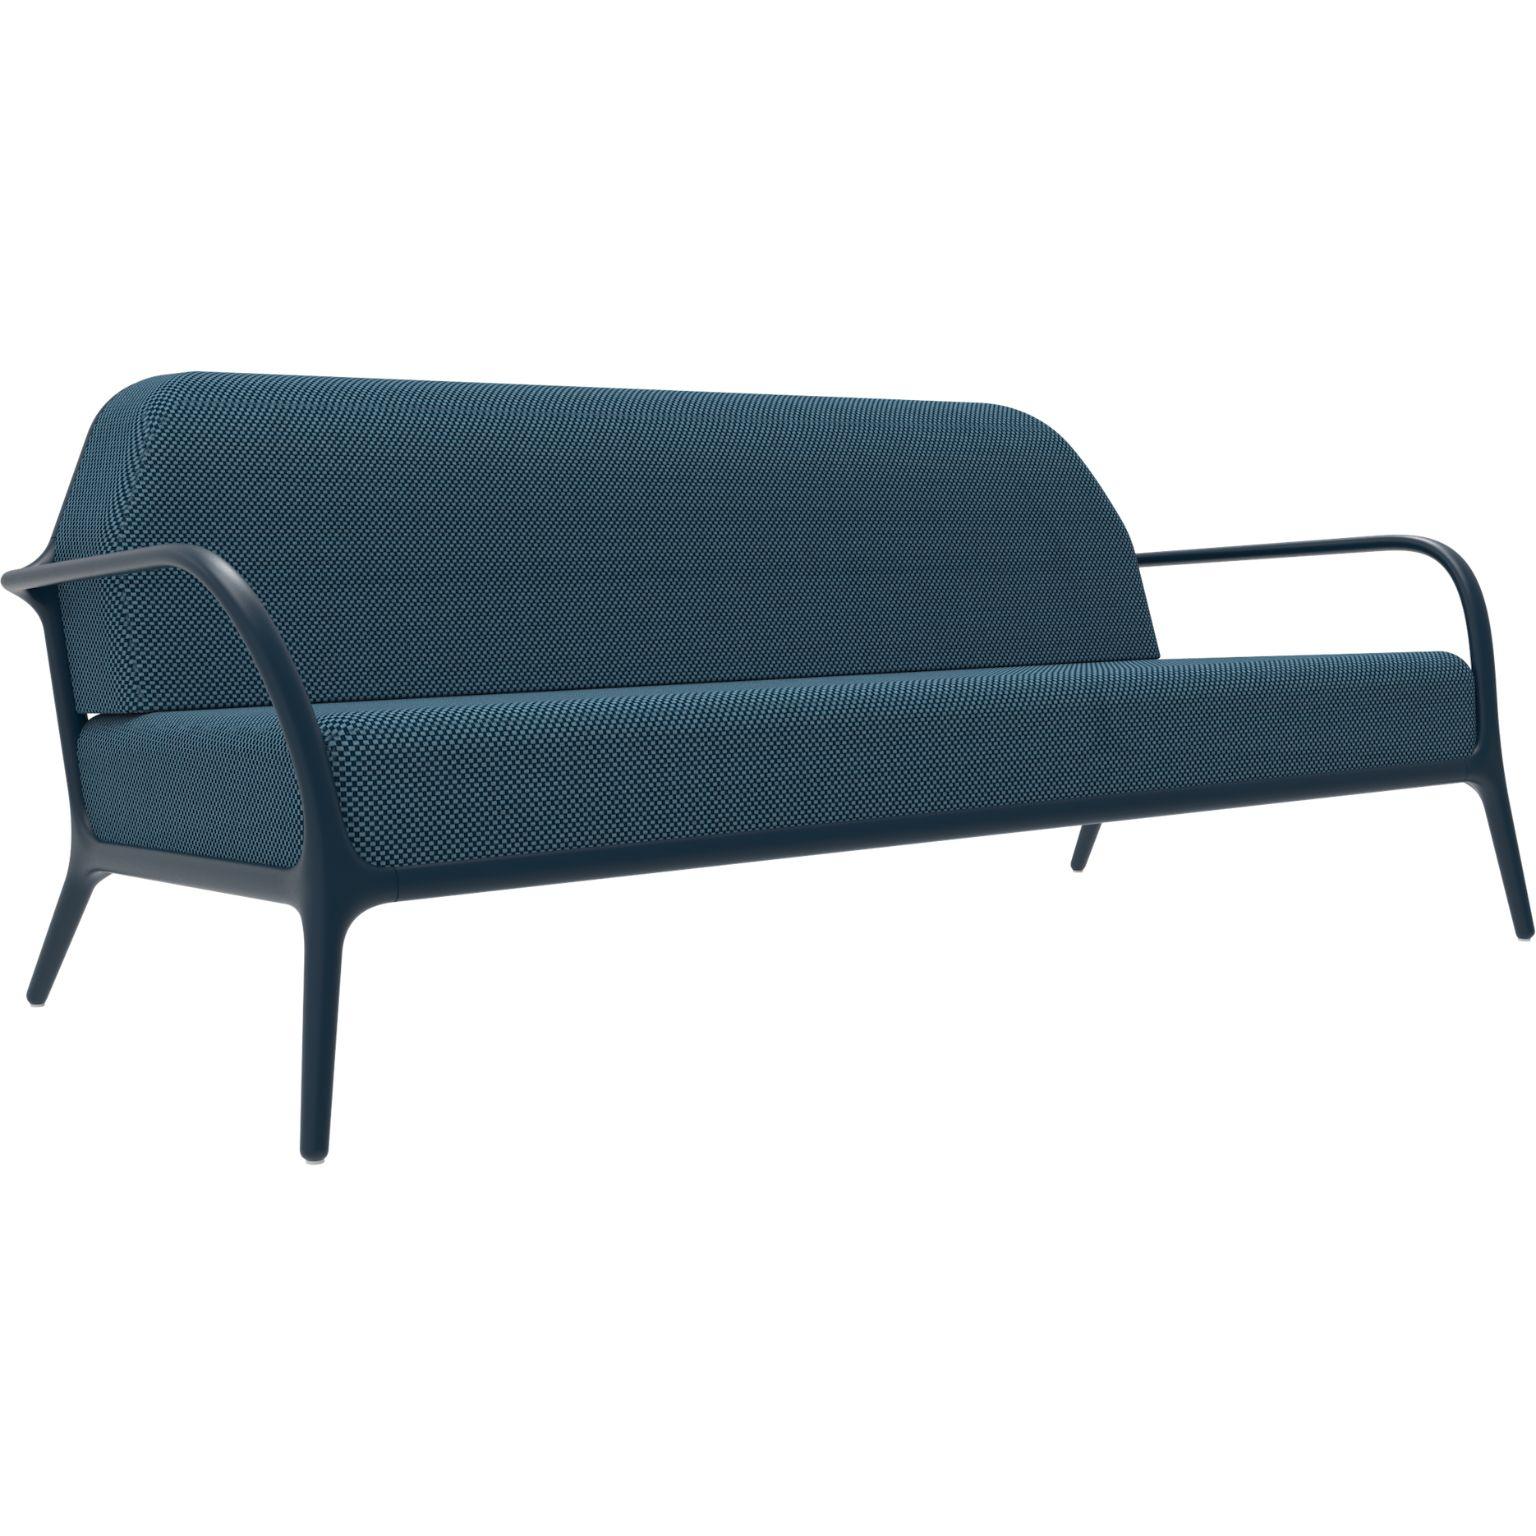 Xaloc Navy sofá by MOWEE
Dimensions: D100 x W200 x H81 cm (Seat Height 42 cm)
Material: Aluminium, Textile
Weight: 46 kg
Also Available in different colors and finishes. 

 Xaloc synthesizes the lines of interior furniture to extrapolate to